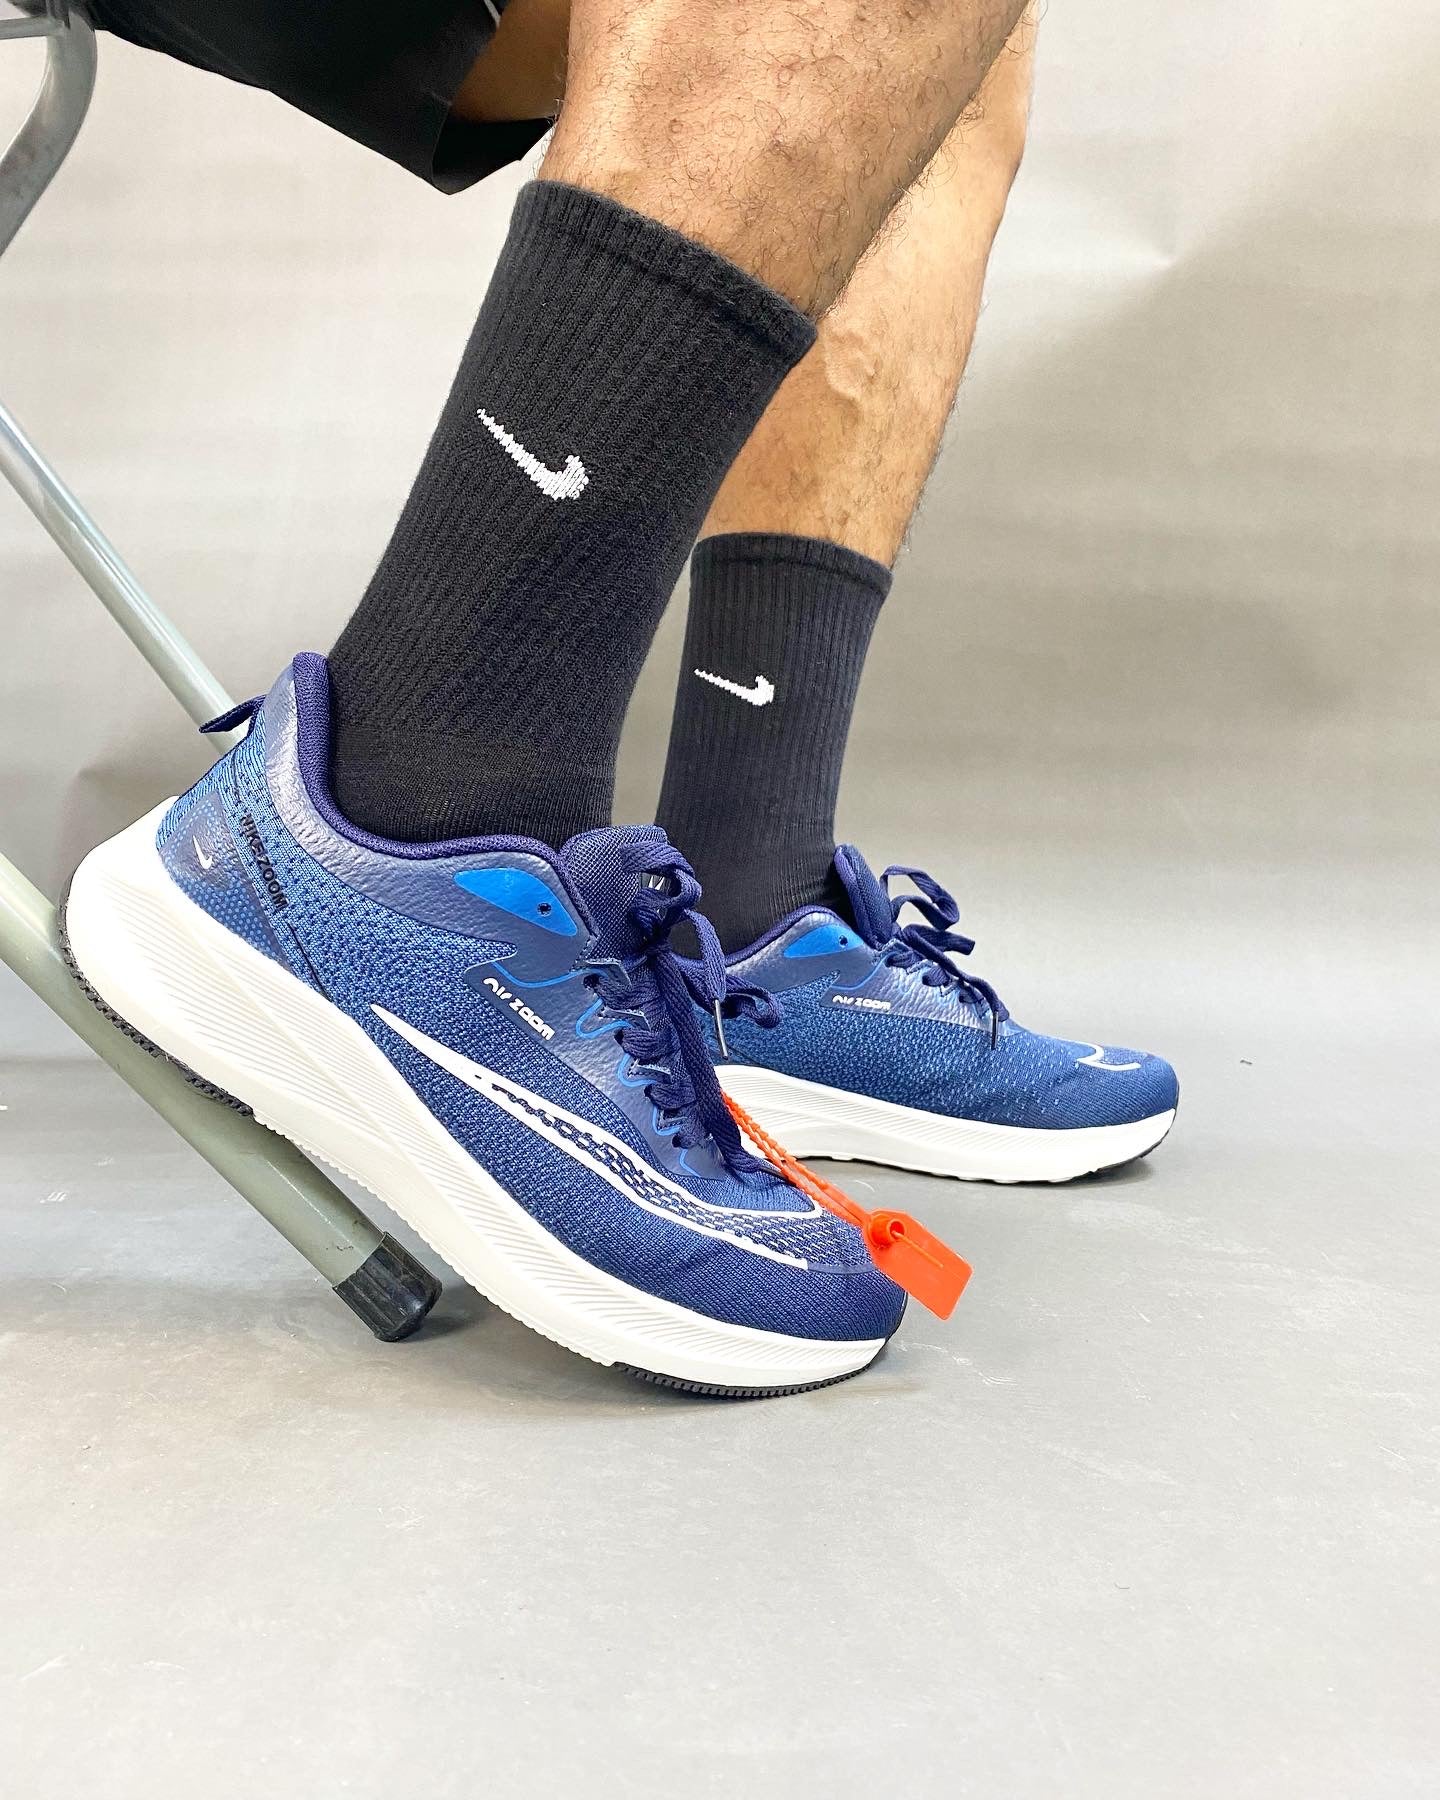 Nike sport trainer blue with free socks